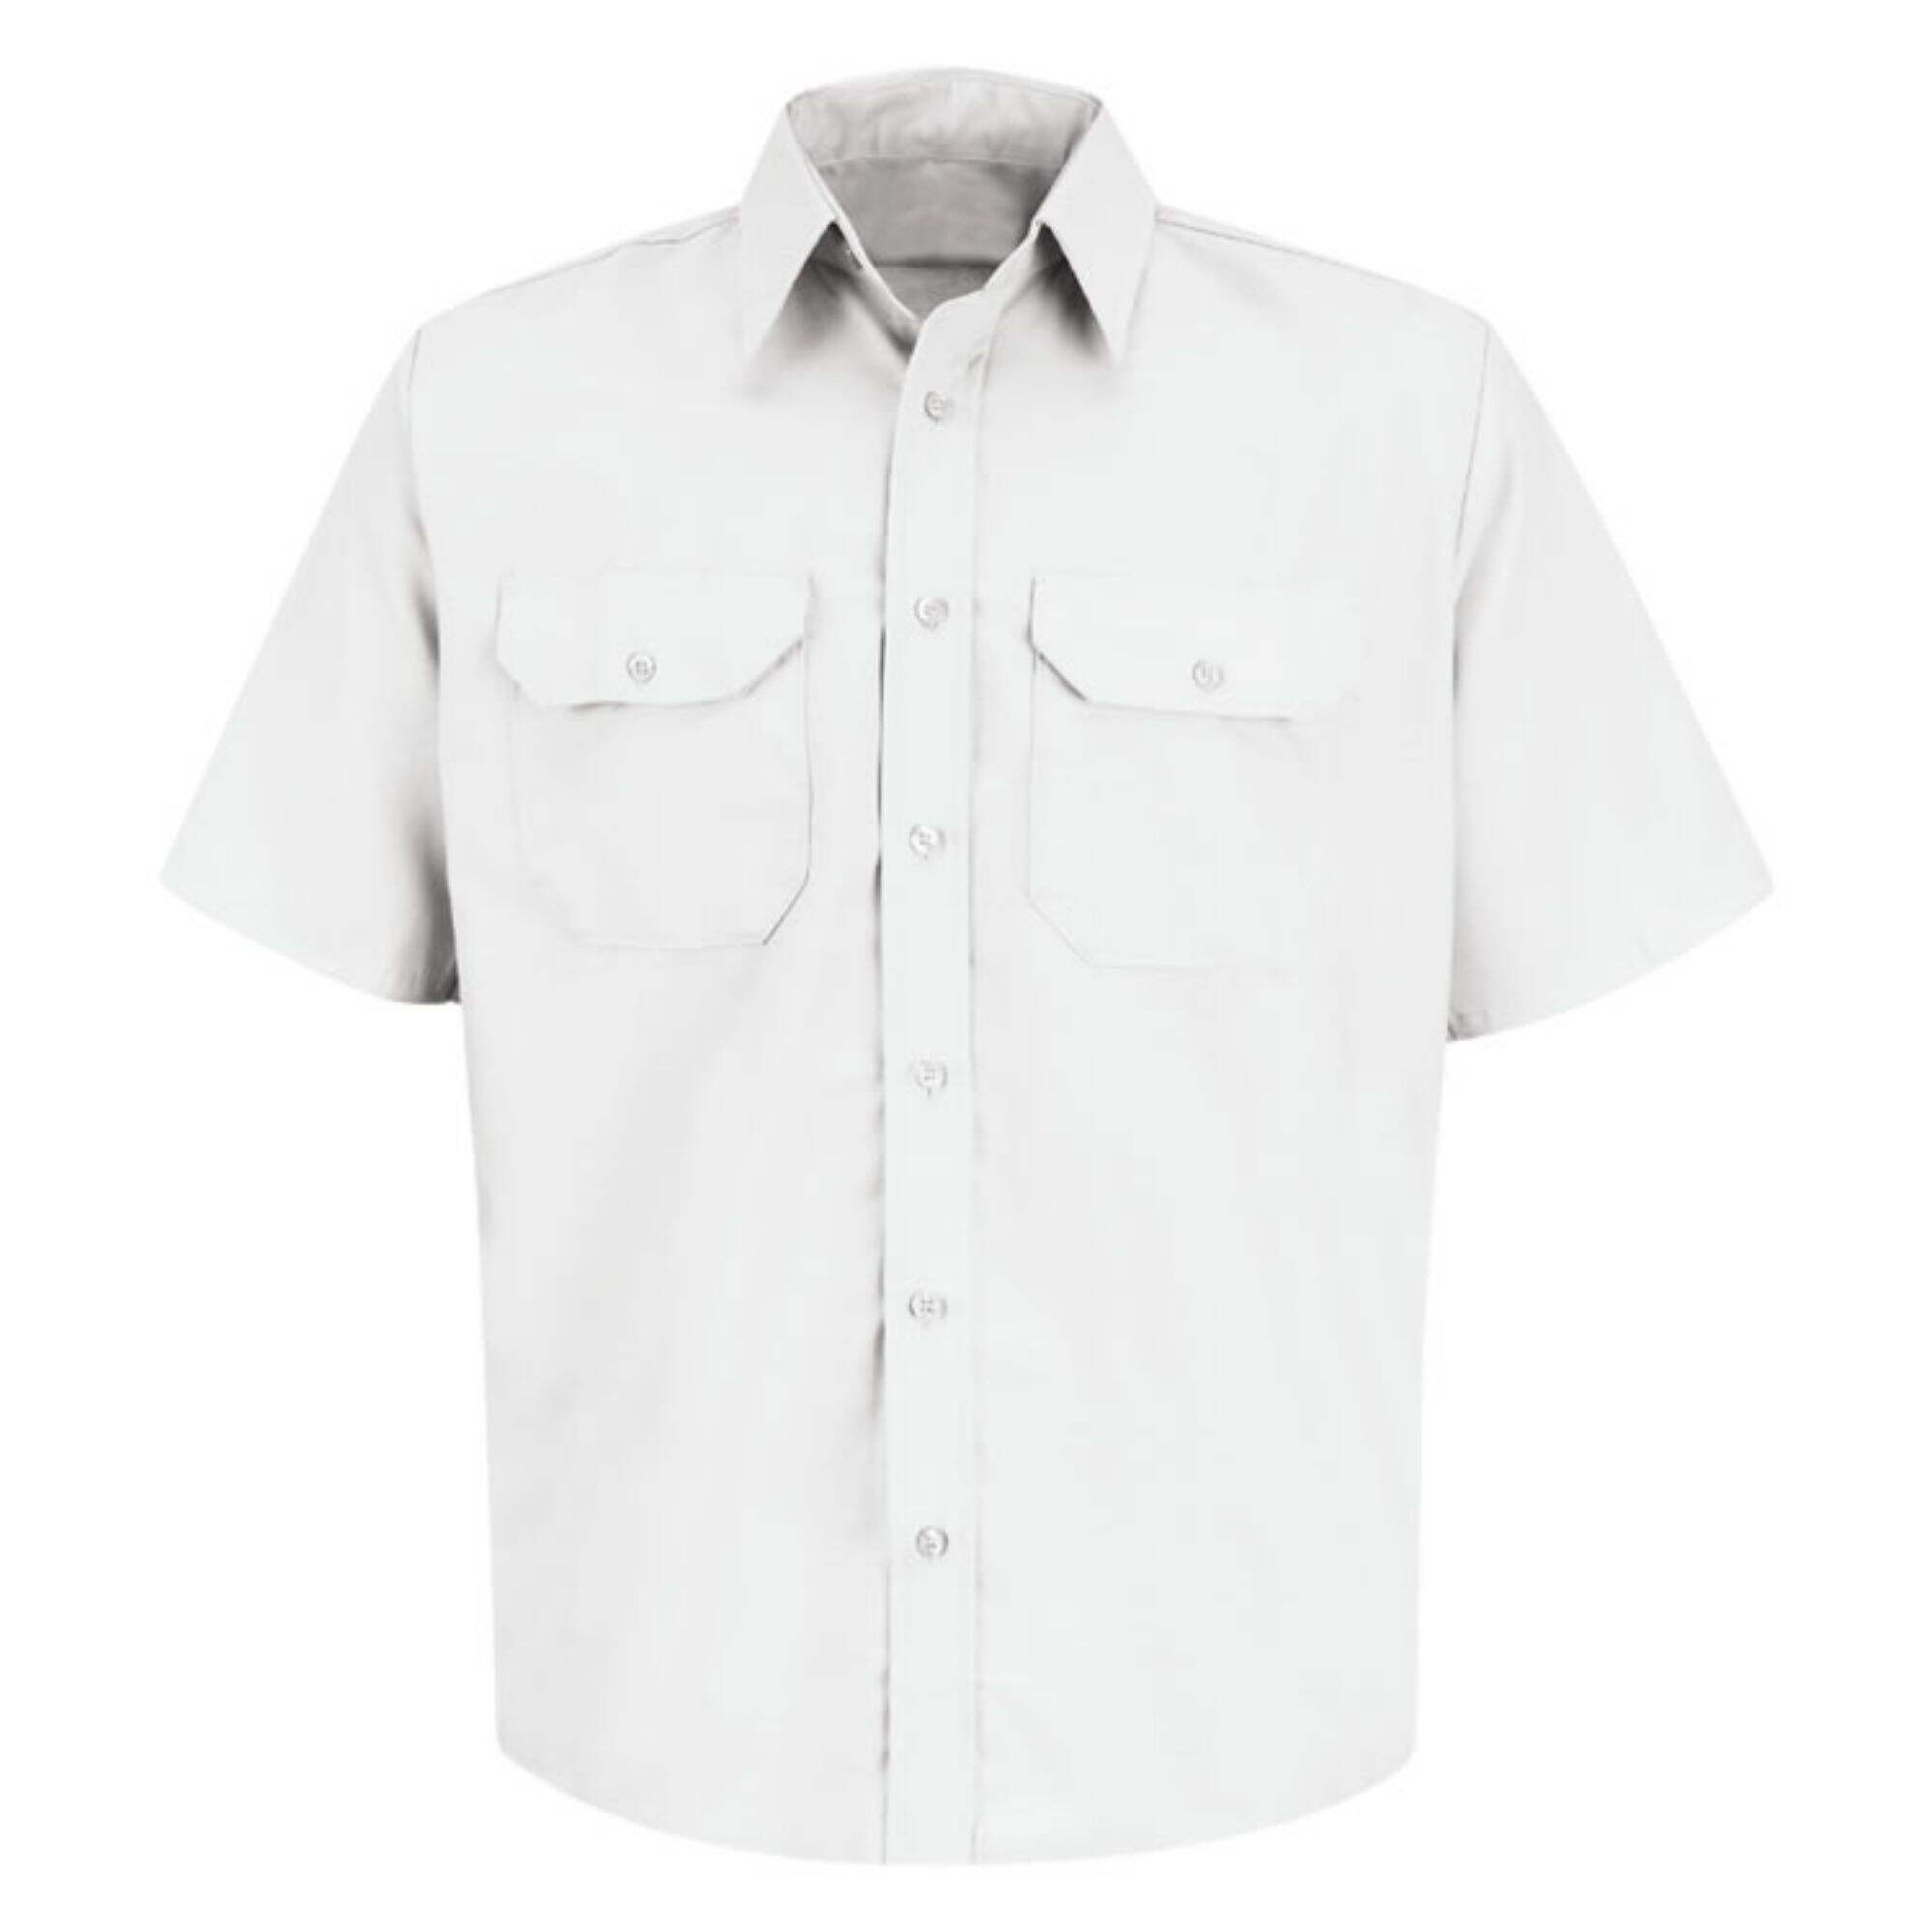 Hot Sale Polyester / Cotton Custom Short Sleeve Unisex Uniform Shirt With Two Pockets On The Chest